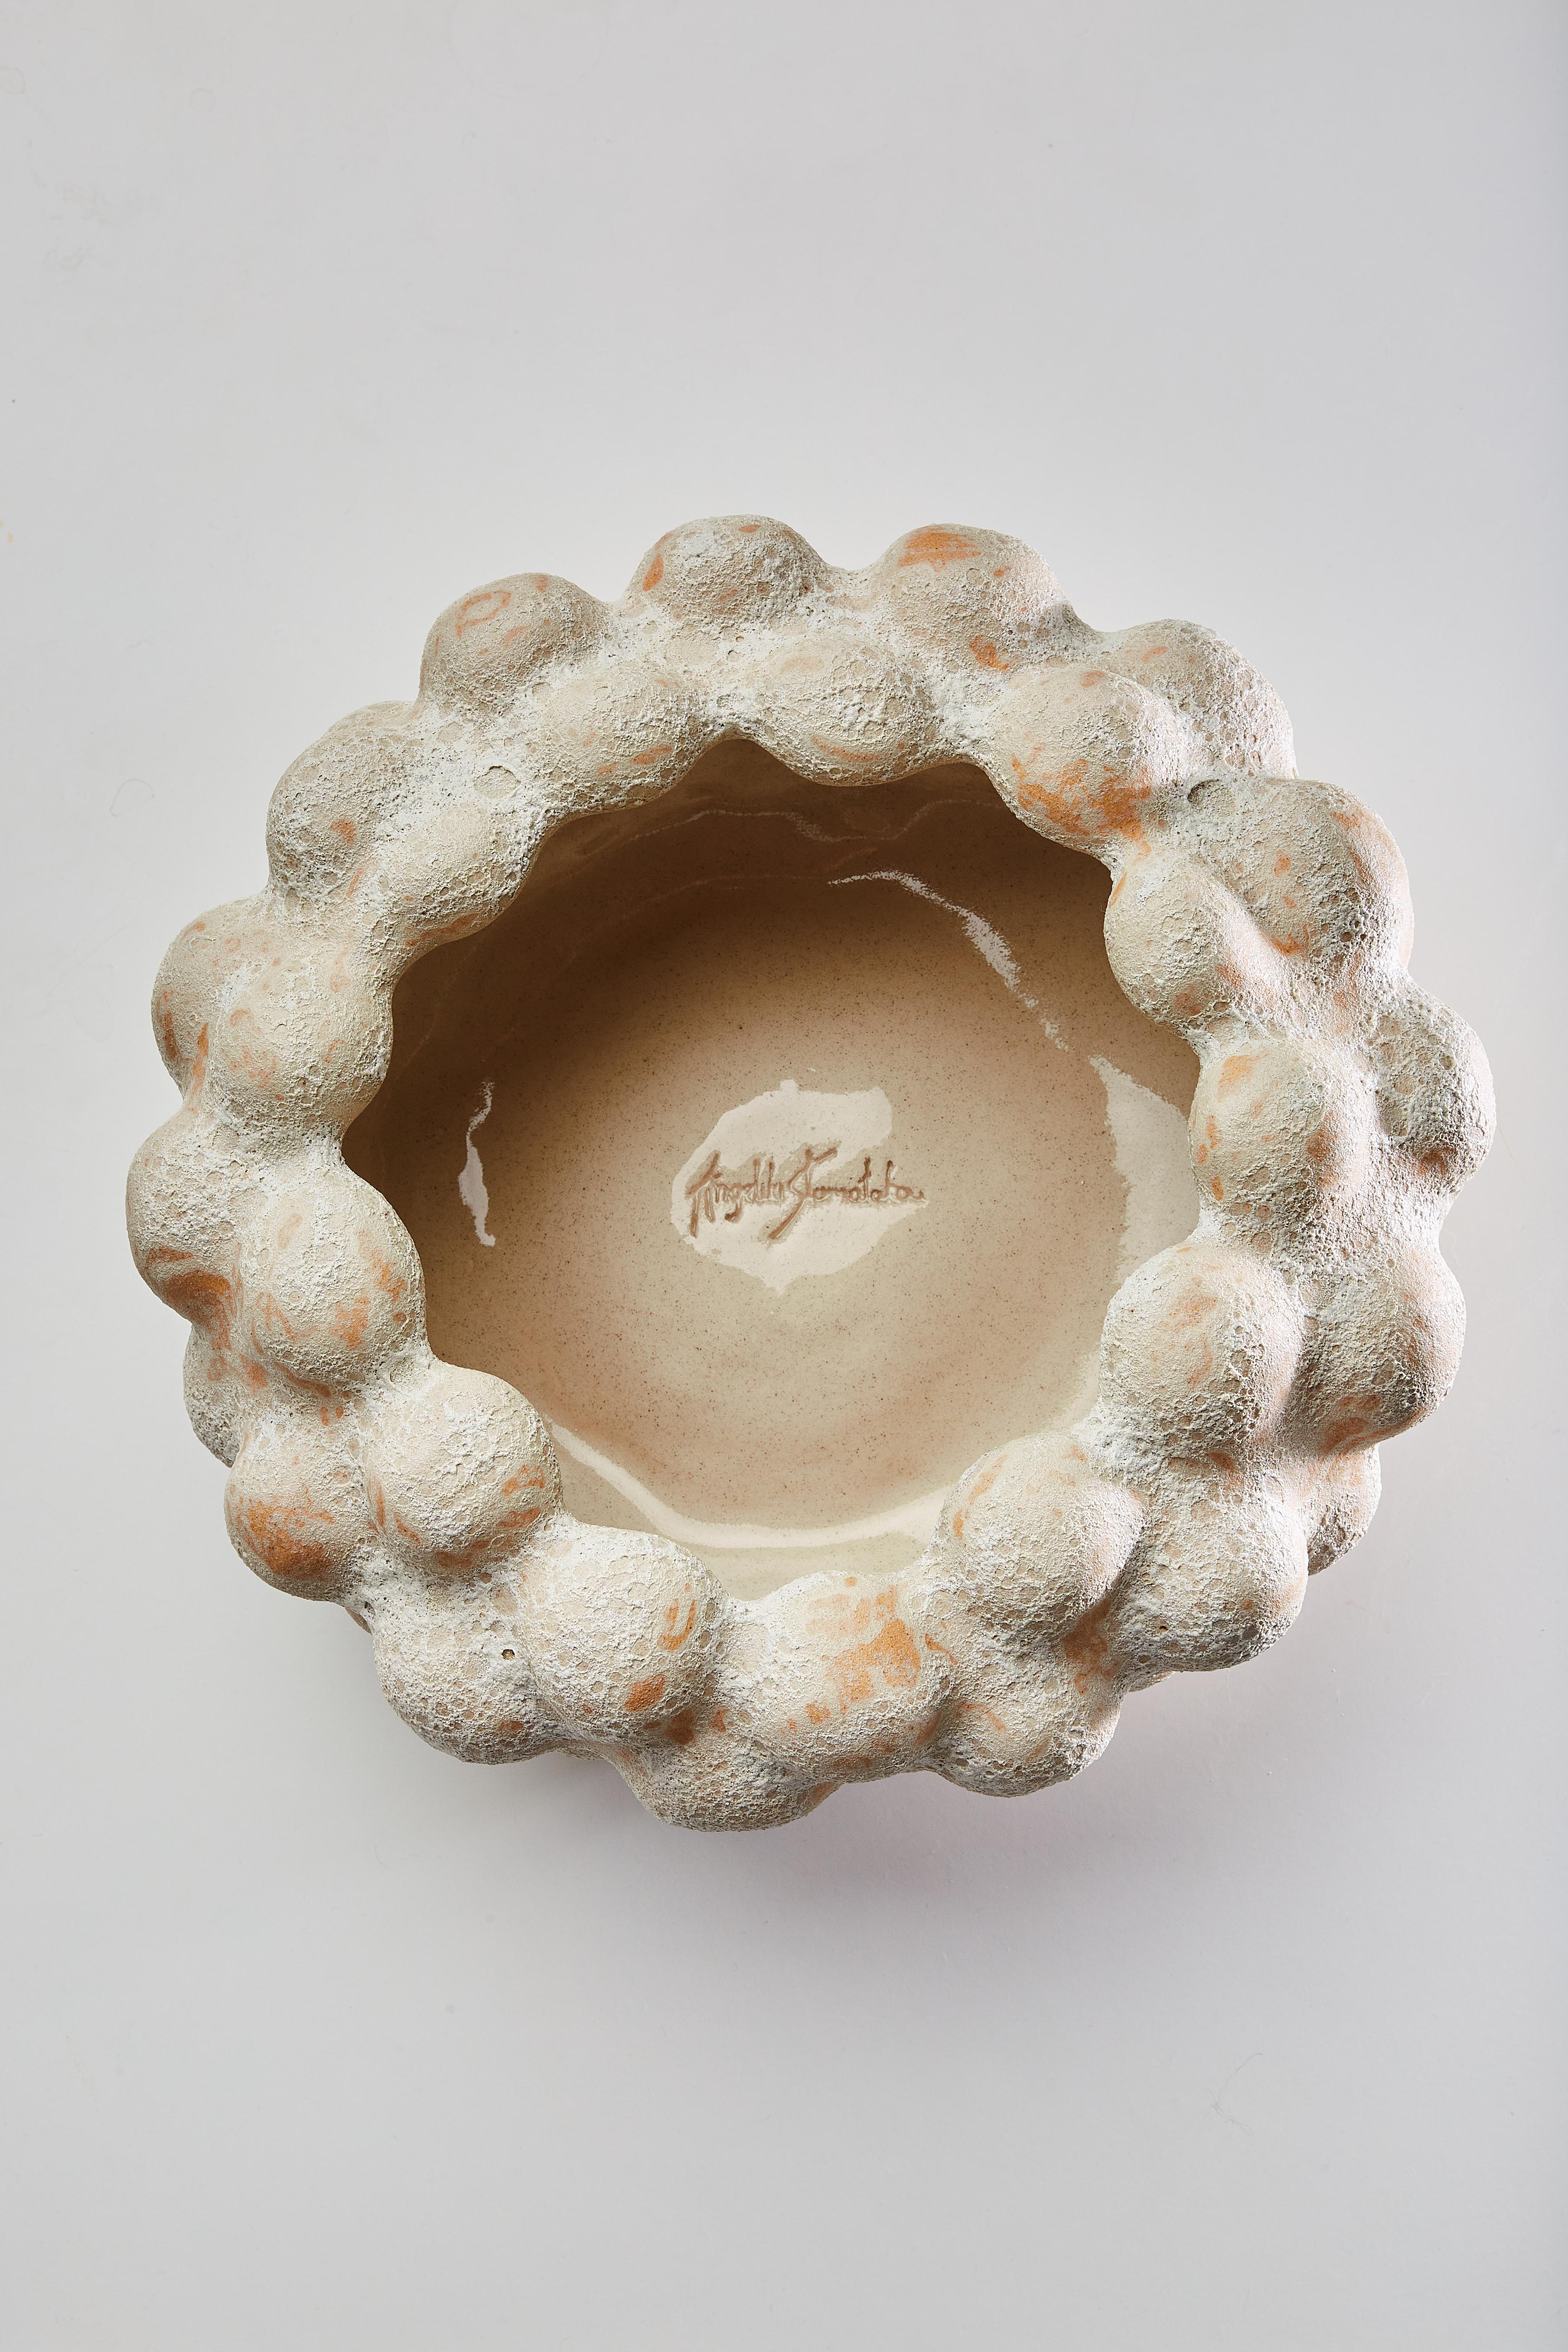 Mulberry Collection centerpiece by Angeliki Stamatakou
One of a kind, 2022
Dimensions: H 15 x W 34 cm.
Materials: Stoneware, handmade glaze.

Angeliki Stamatakou is a ceramics artist based in Athens, Greece. She studied Fine Arts at AKTO